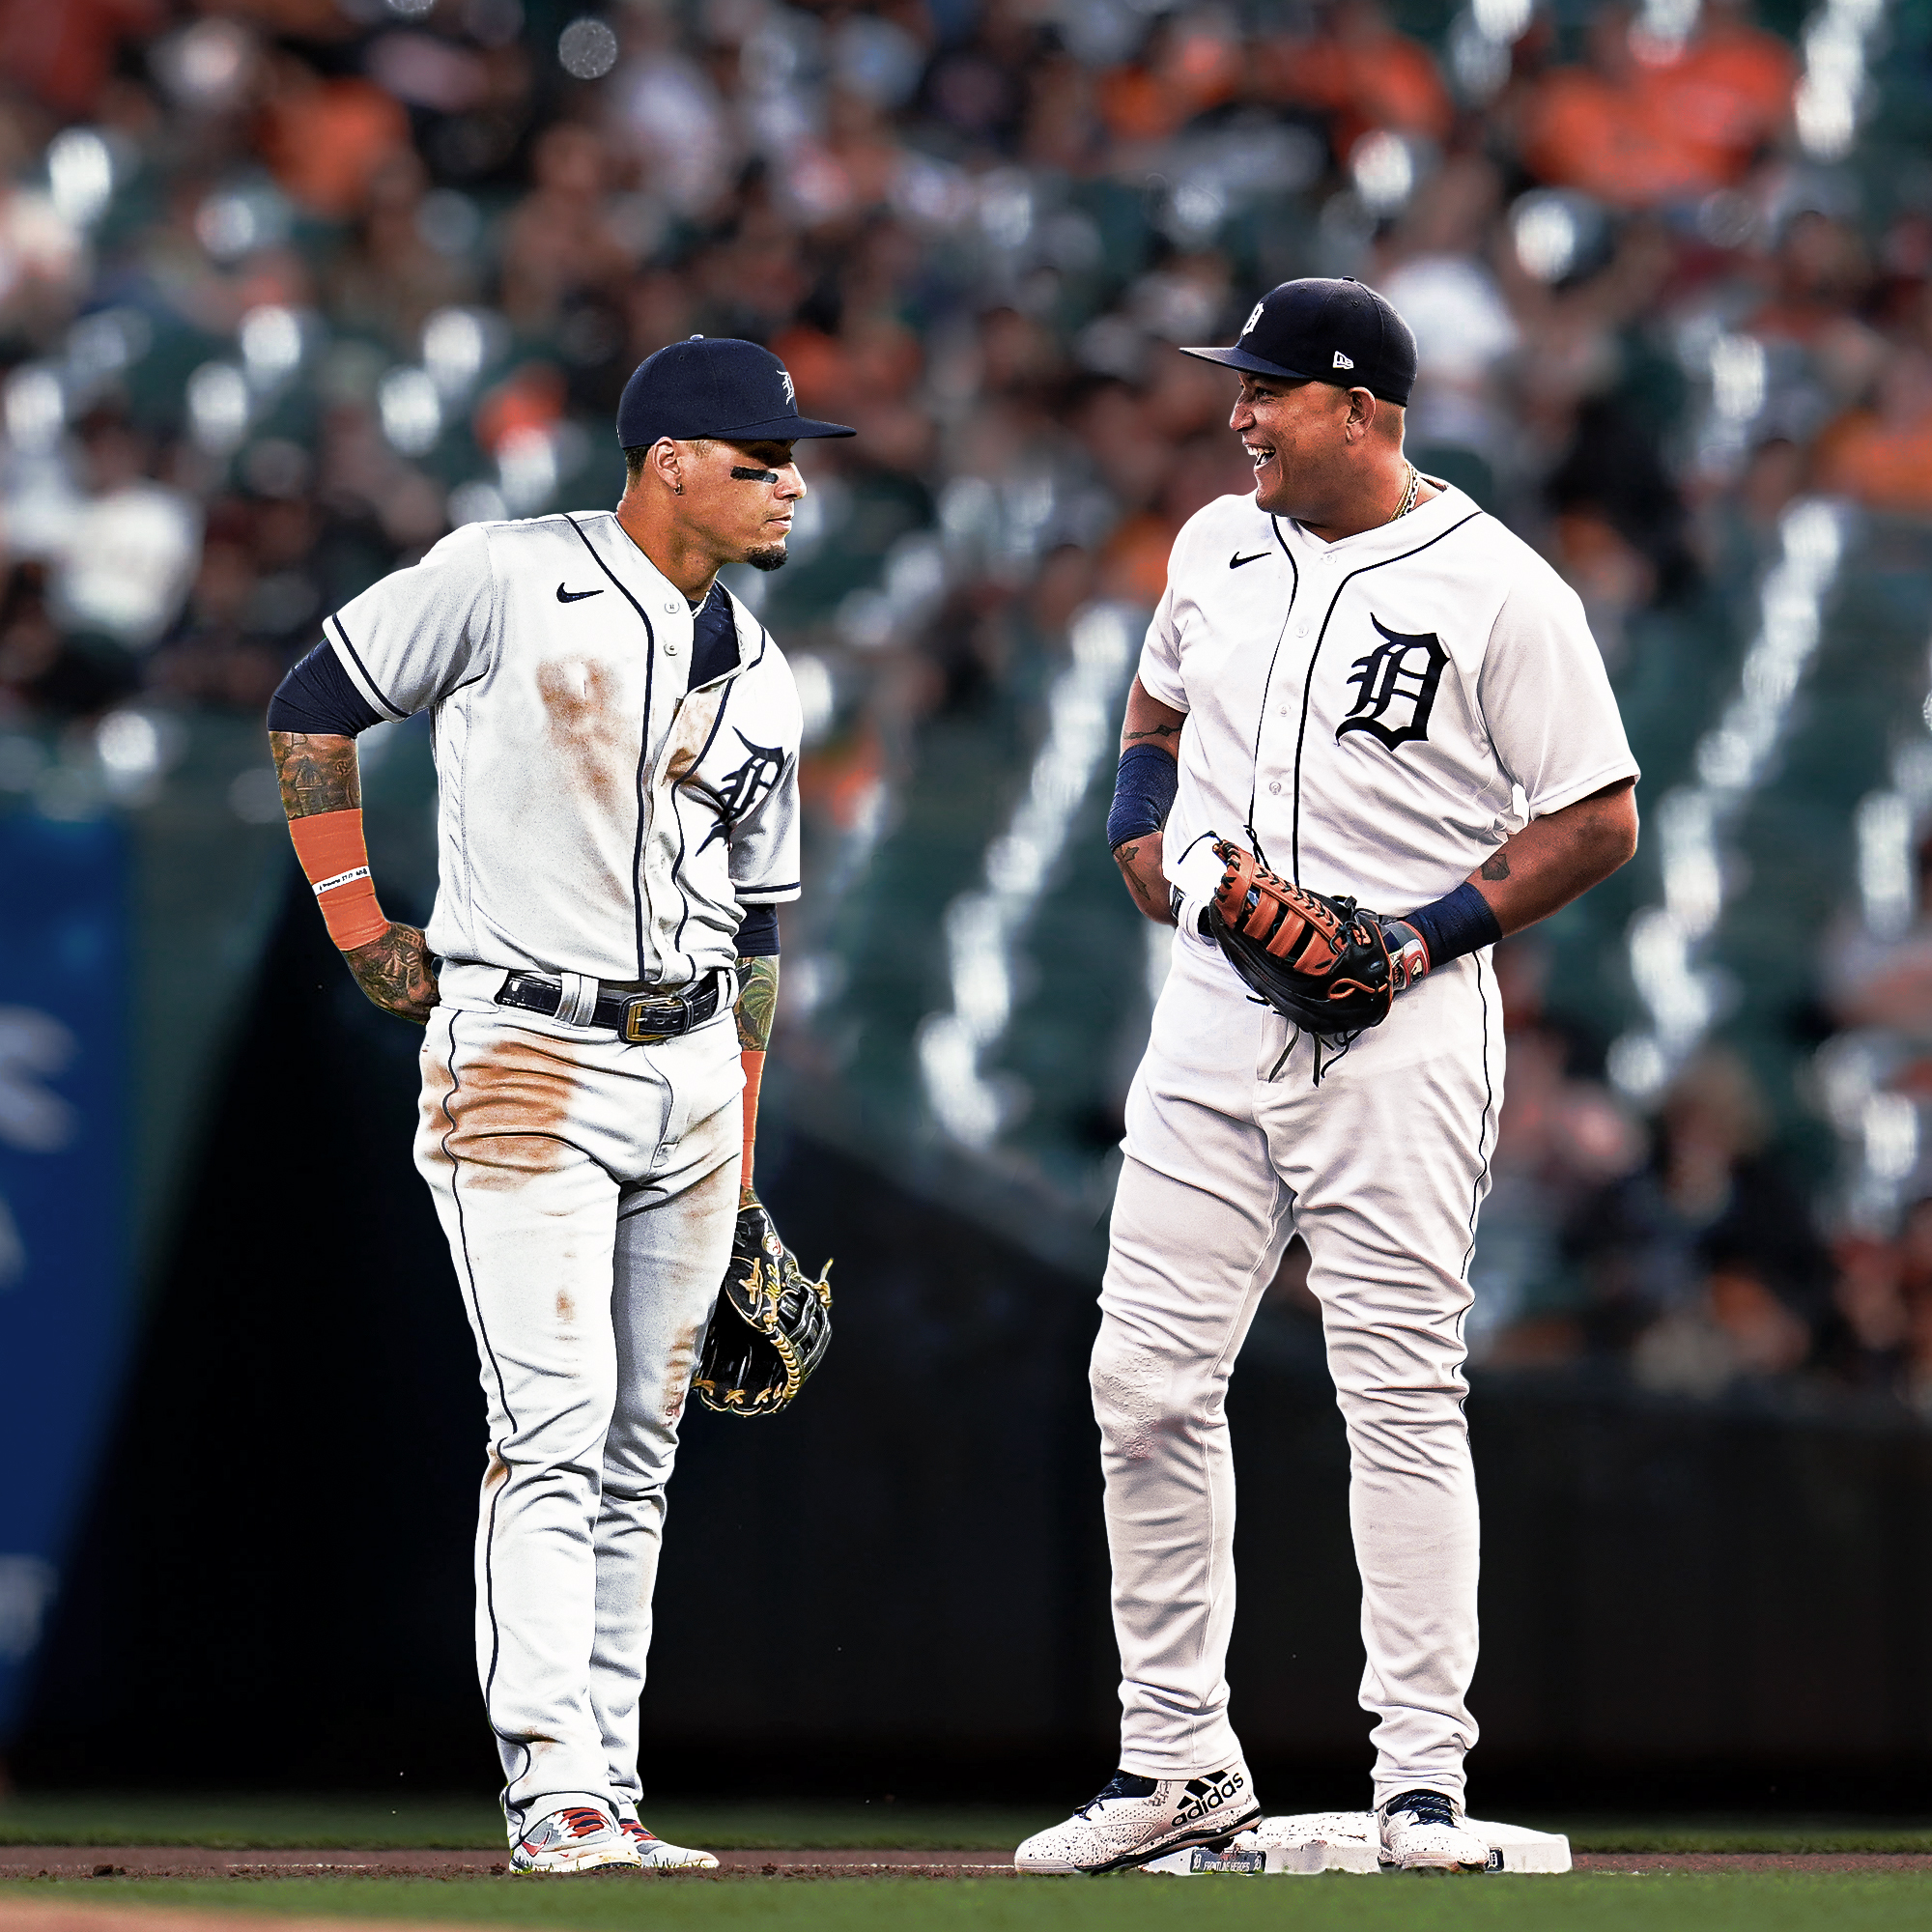 MLB on X: El Mago and Miggy! The @Tigers are gonna be fun. https